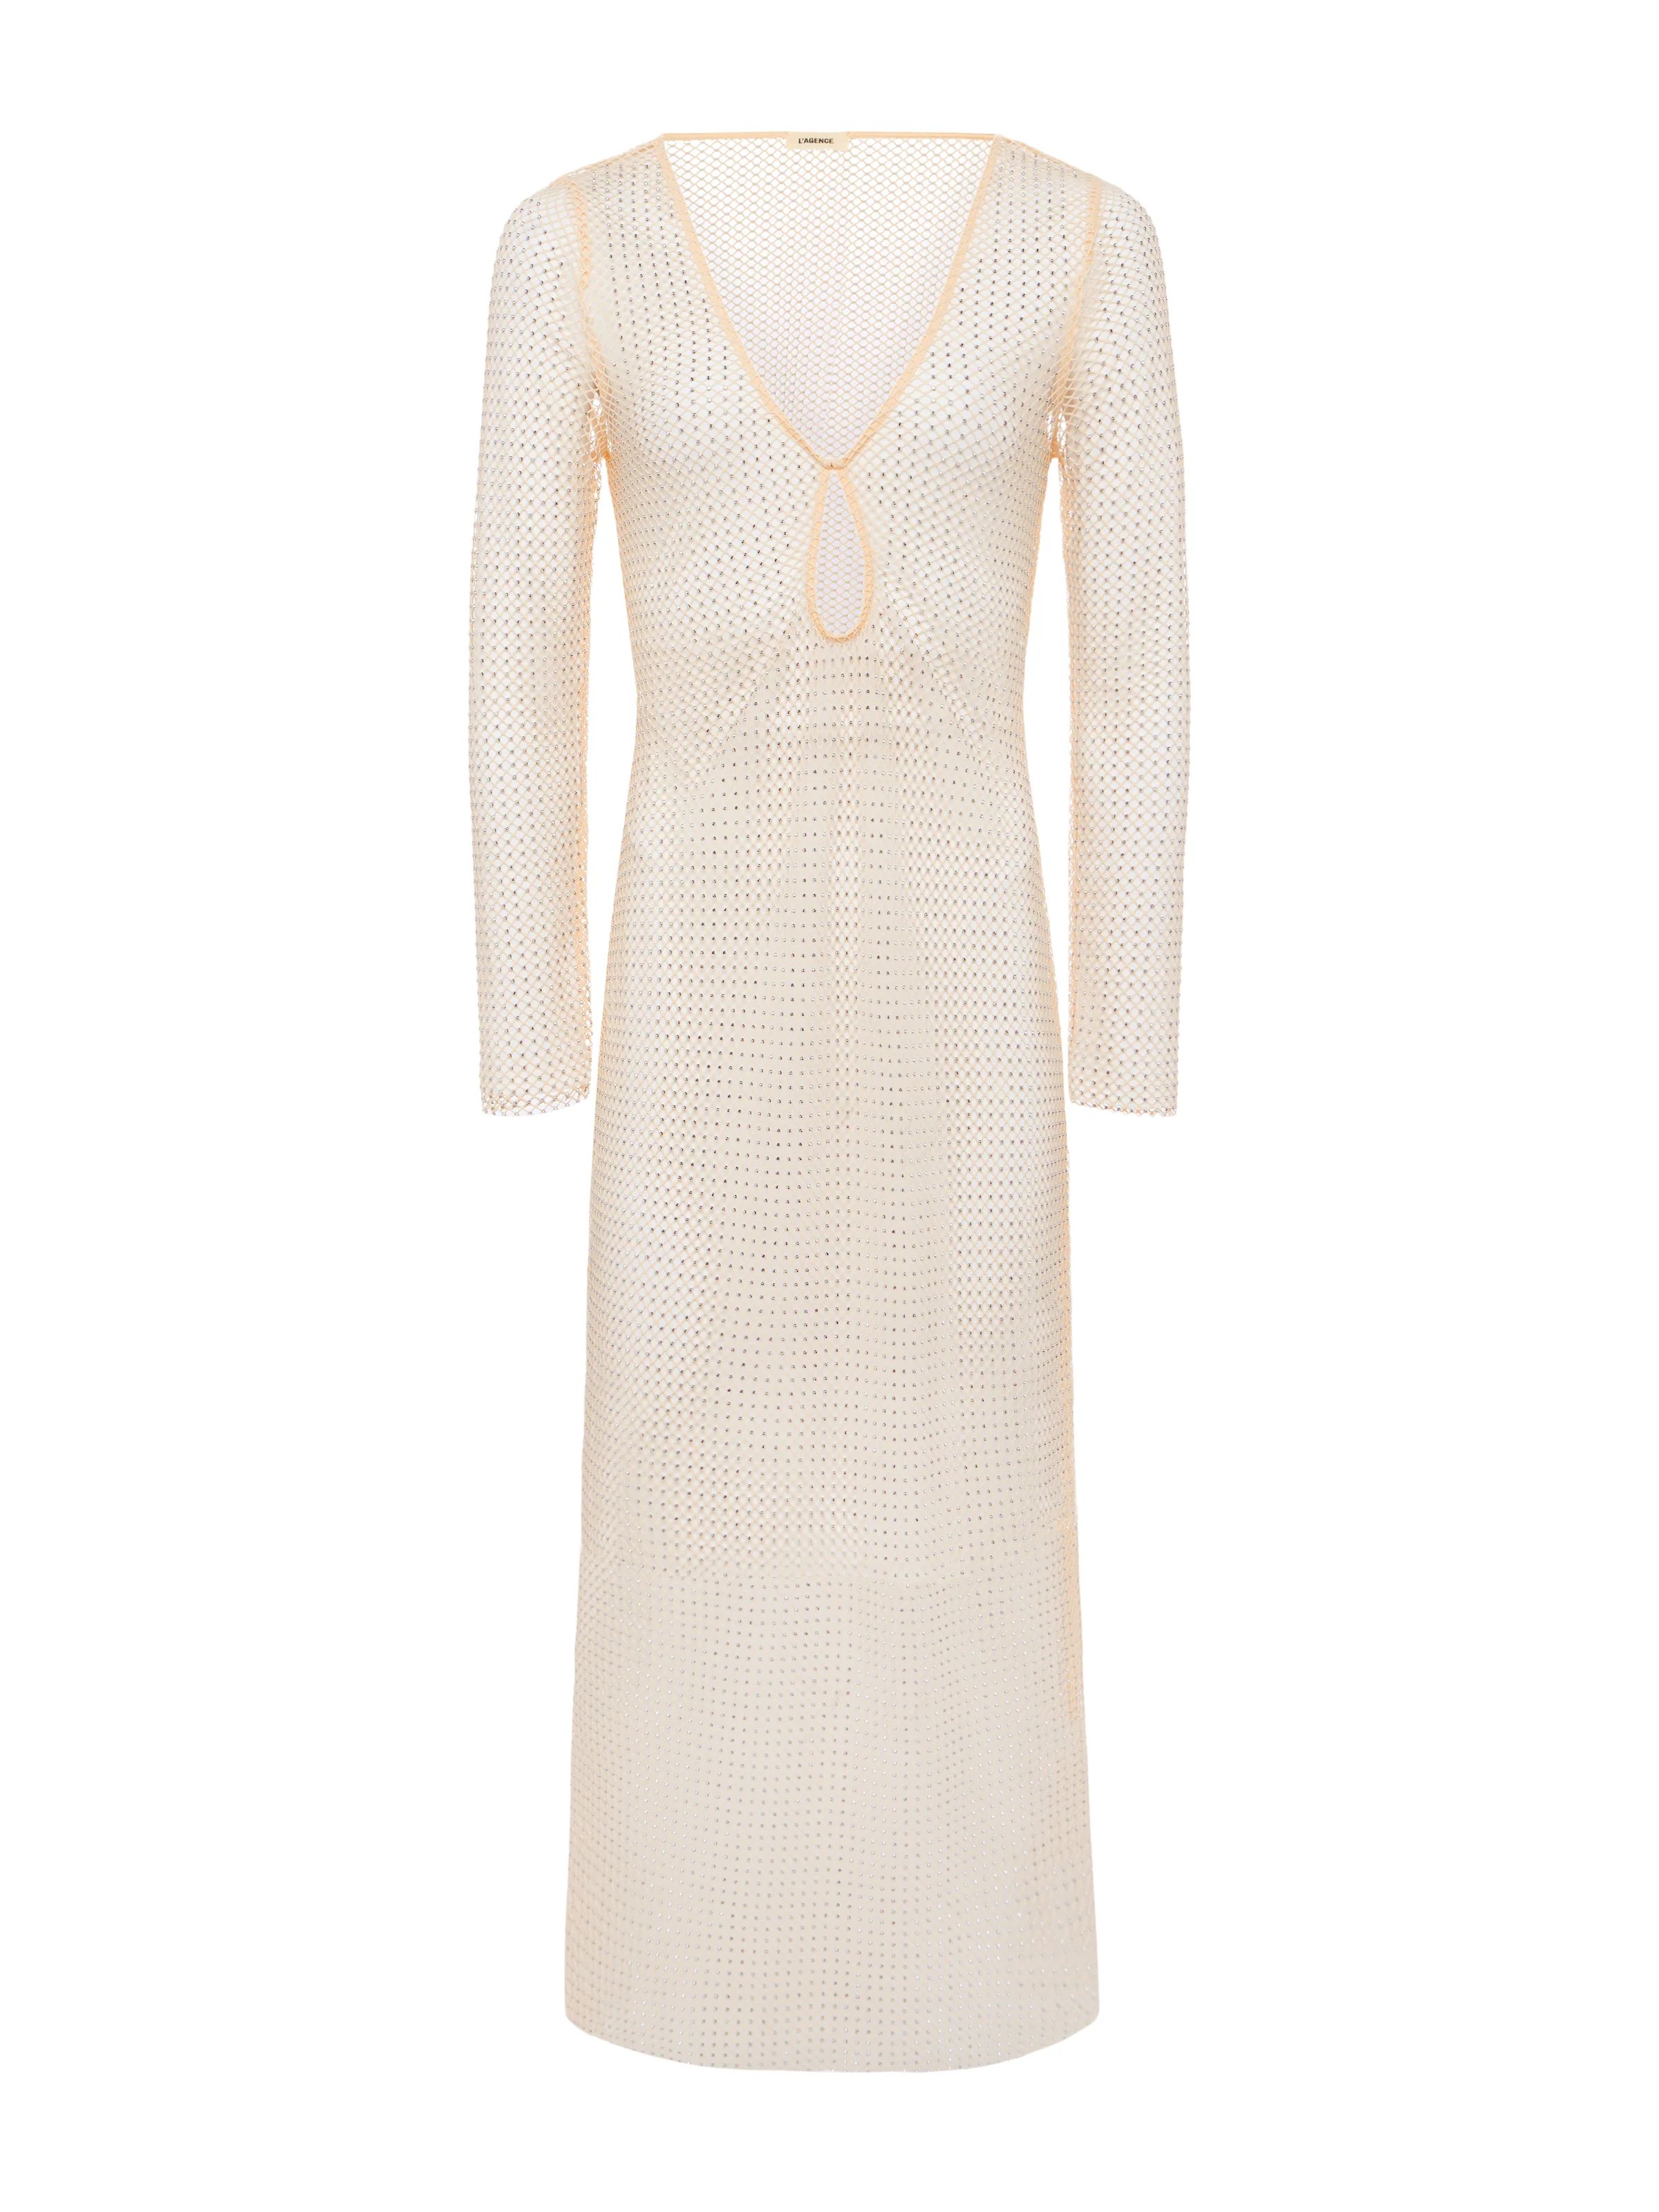 L'AGENCE - Sara Mesh Cover-Up Dress in Champagne | L'Agence